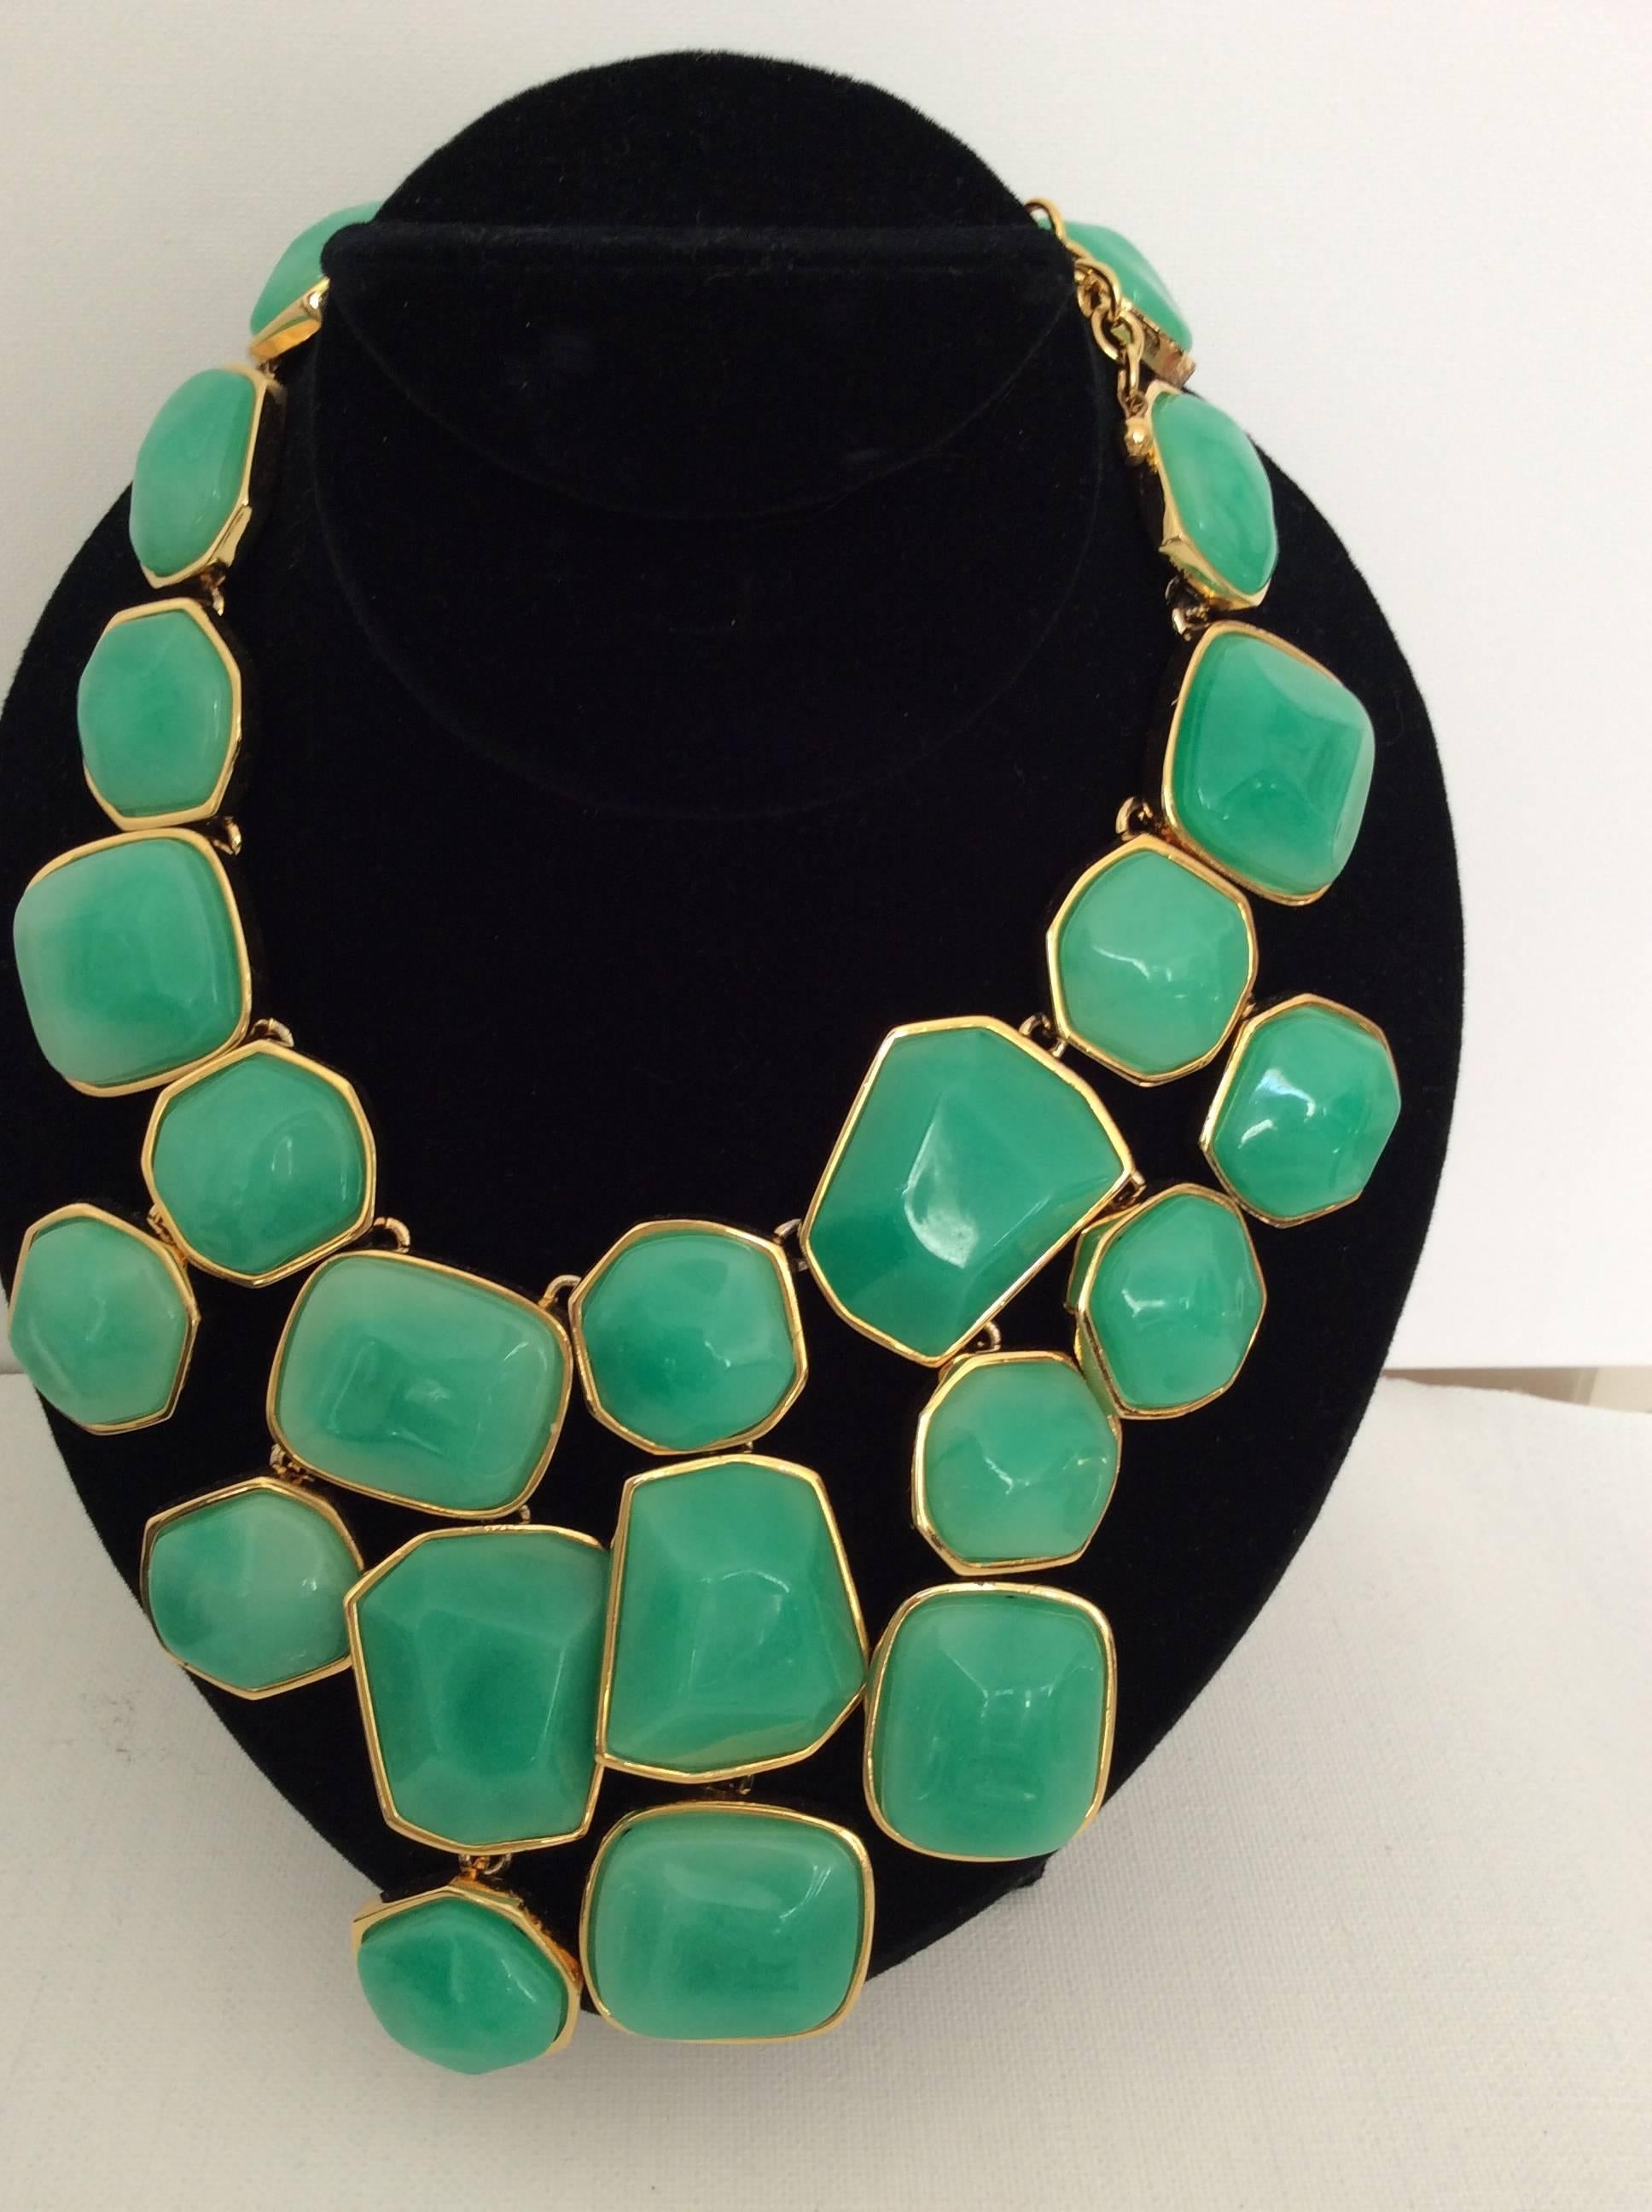 Kenneth J. Lane necklace with matching earring set. A gorgeous gold tone chain with an elaborate series of resin green shapes are inlayed into a remarkably engineered necklace. Truly a showpiece from Kenneth J. Lane. The back shows the elaborate